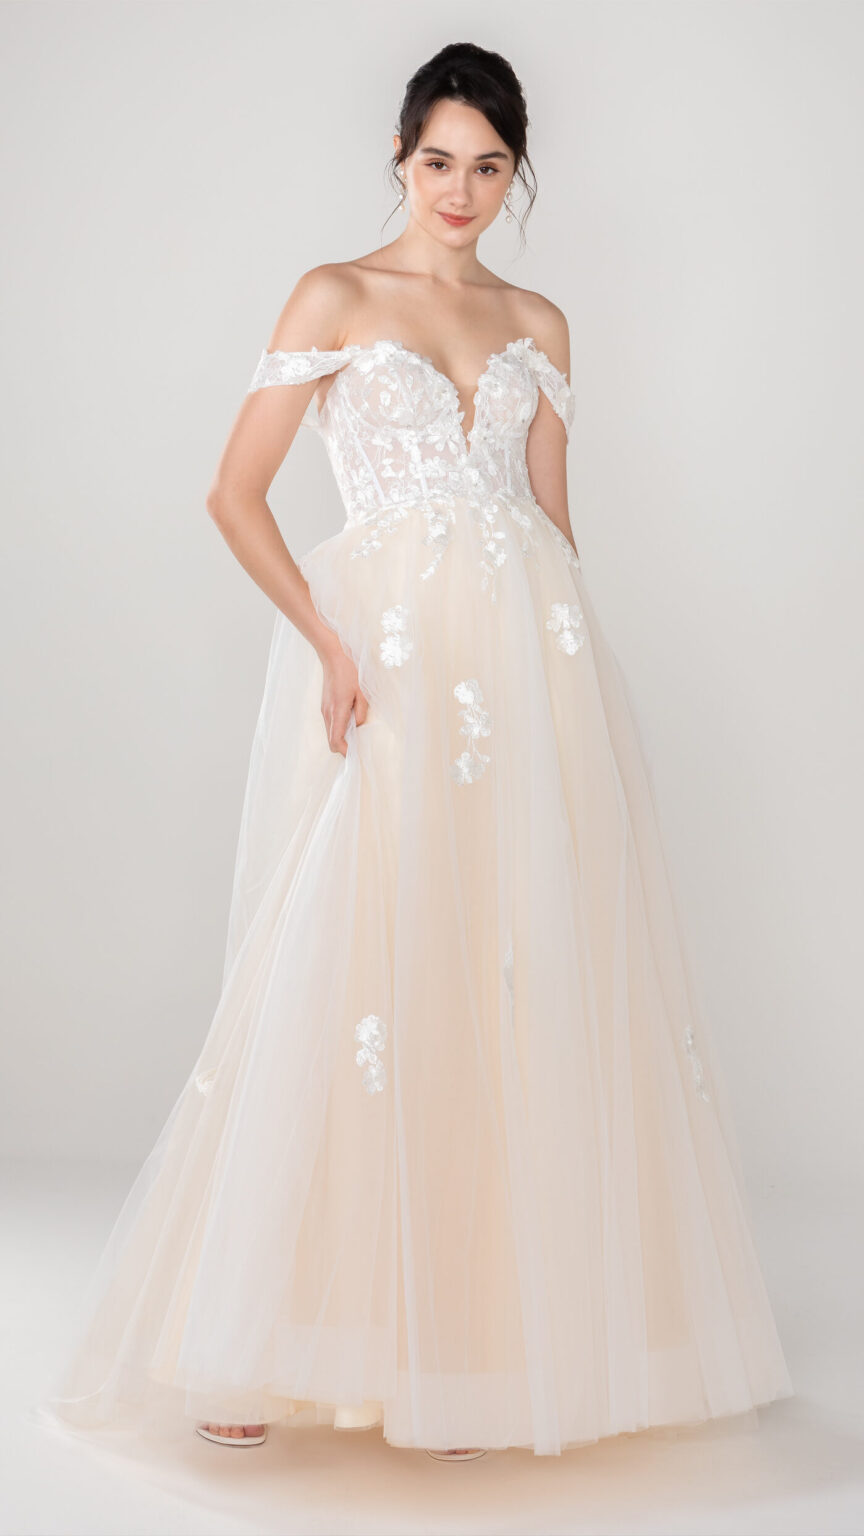 Stunning Wedding Dresses You Can Buy Online by COCOMELODY 2022